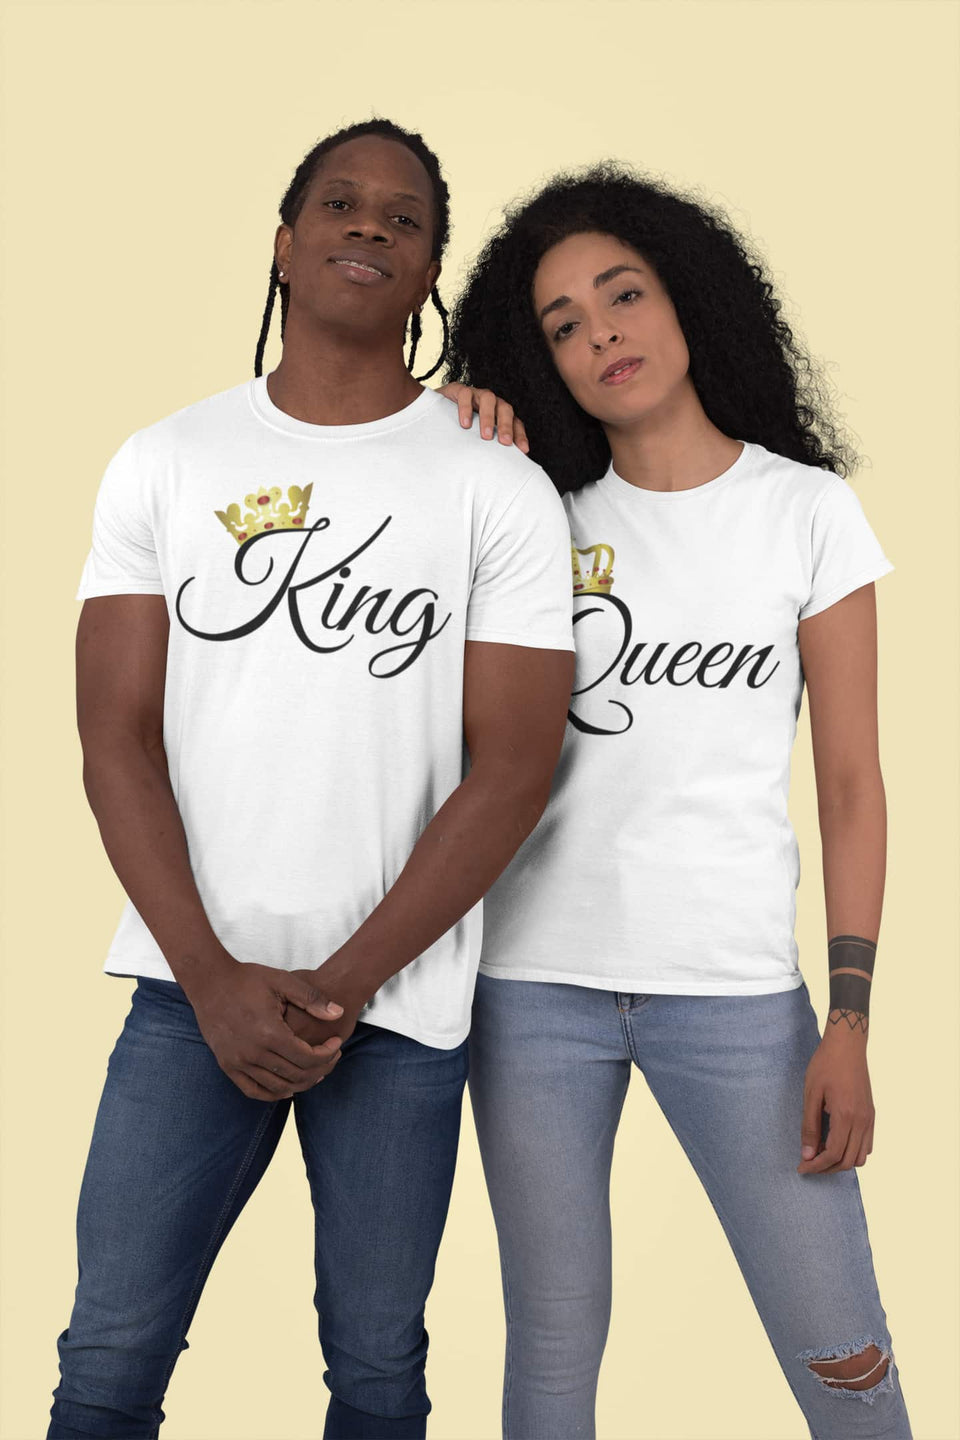 King & Queen - Couple Shirts – Couples Apparel